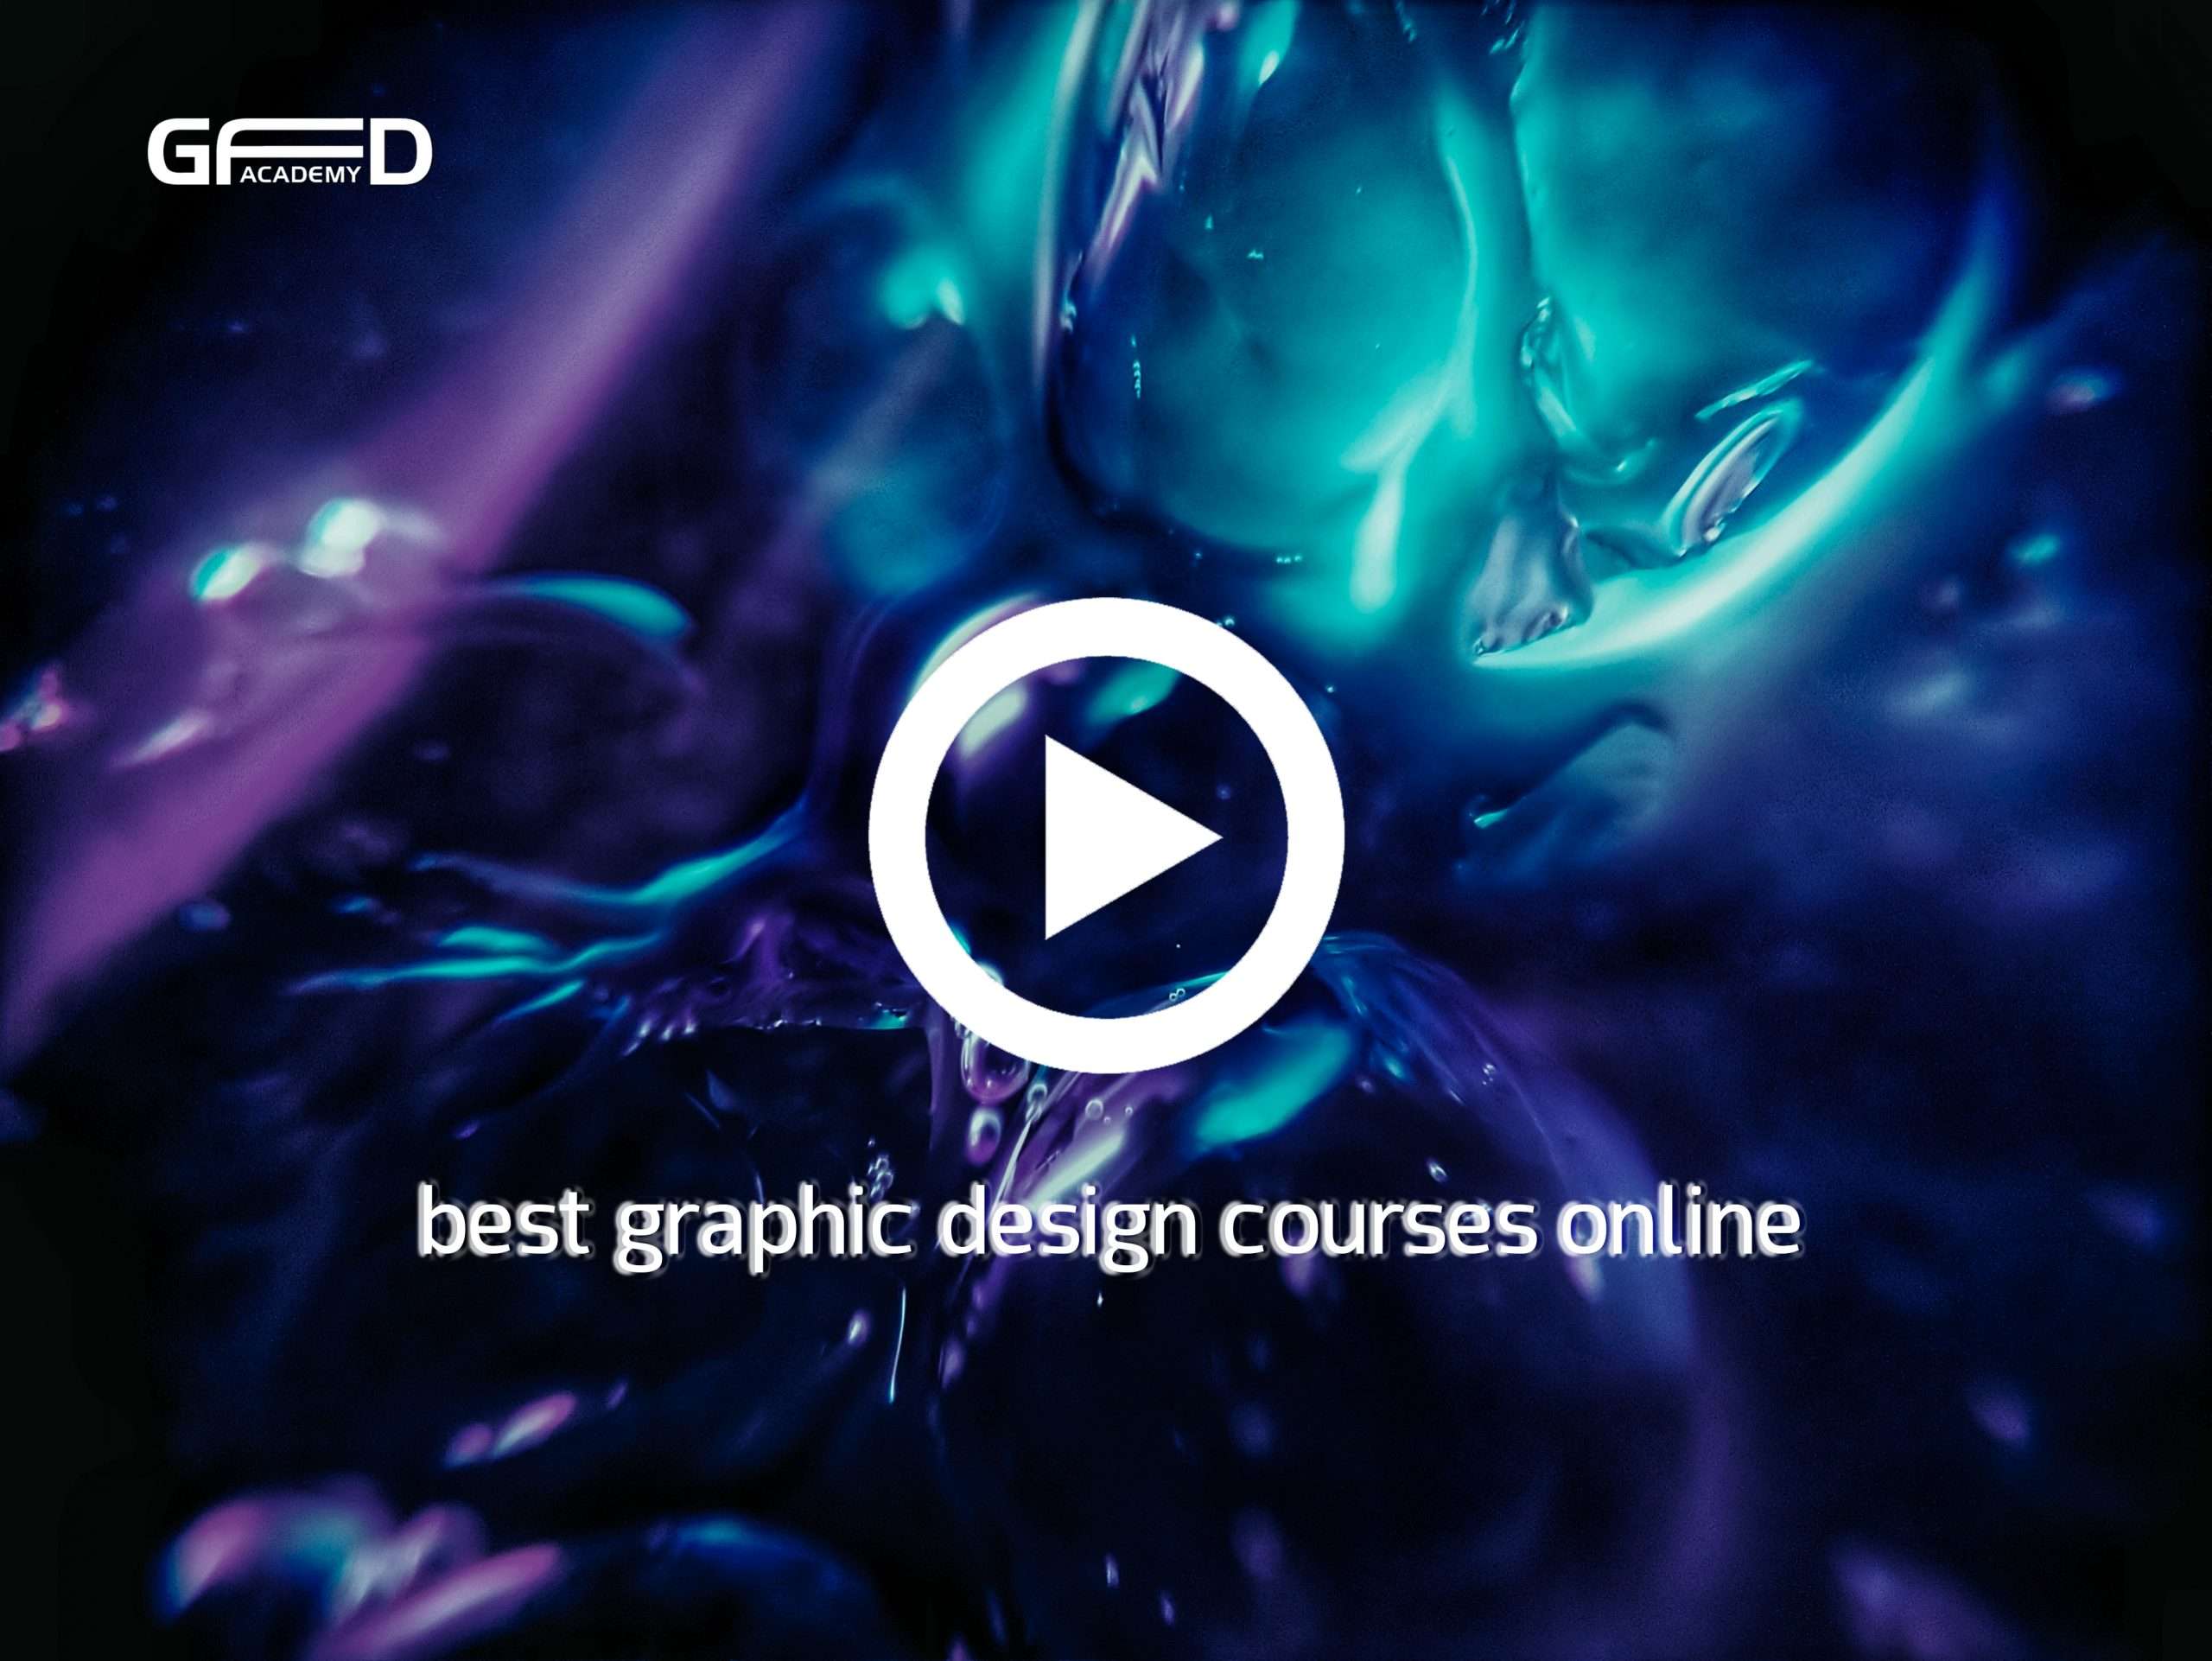 best graphic design courses online By GFD Academy